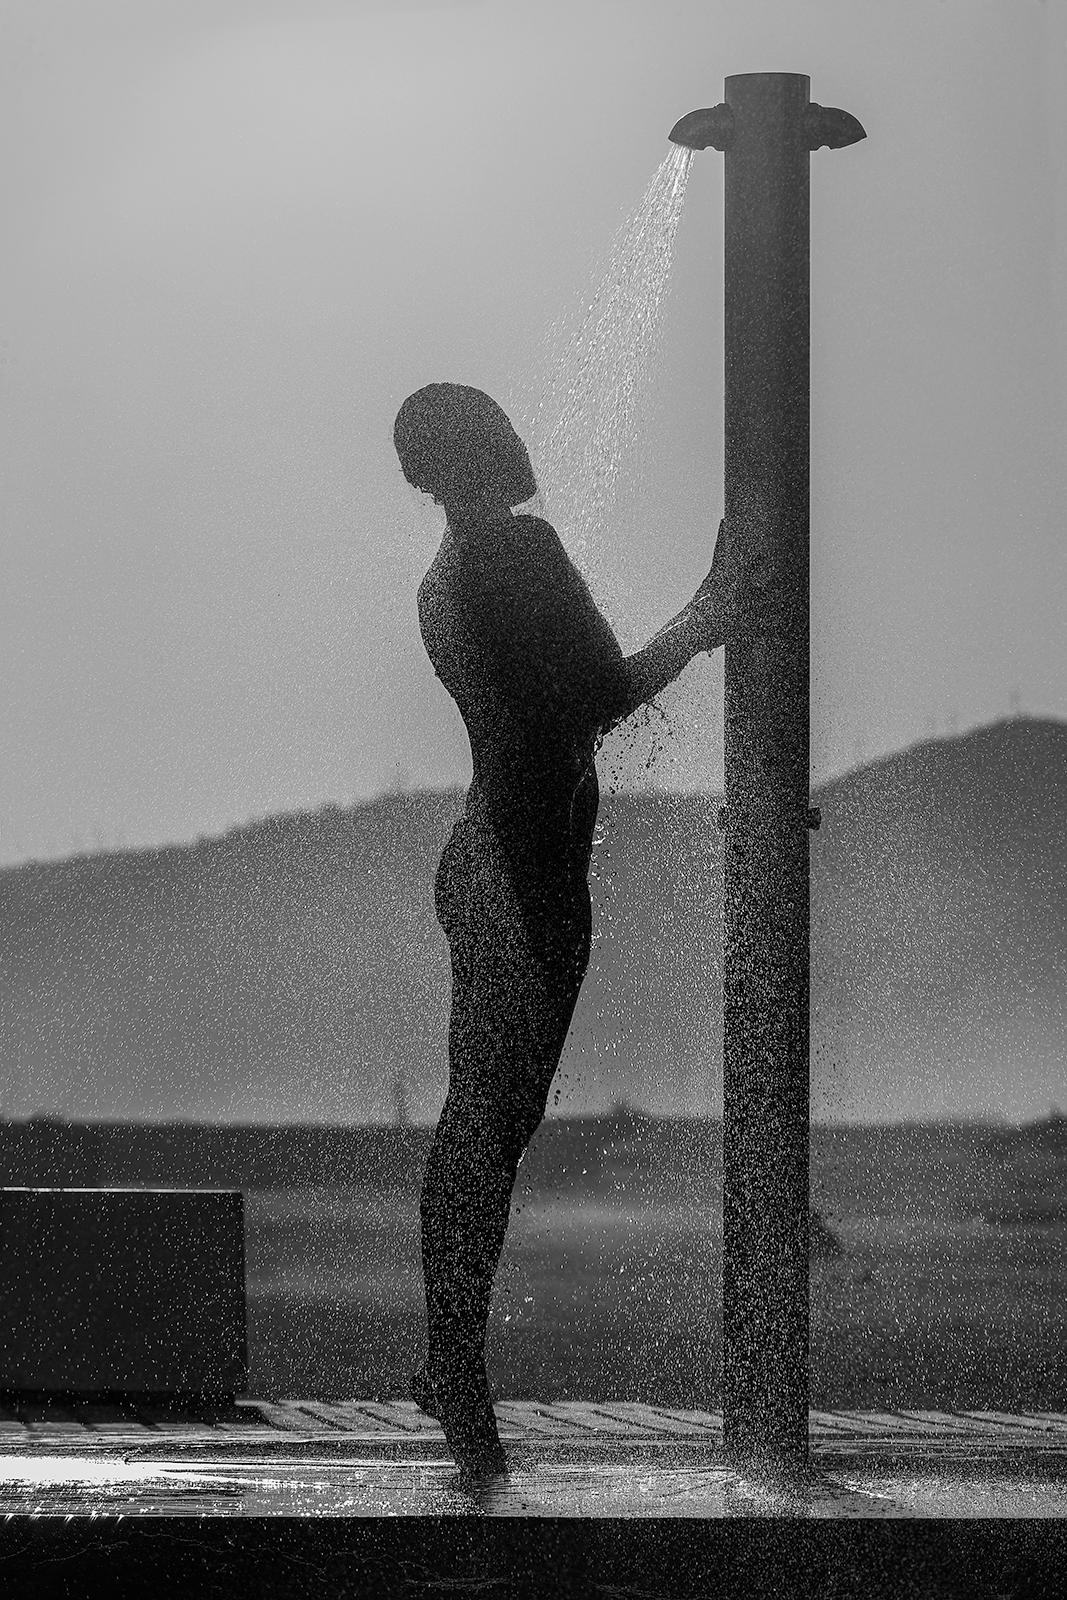 Beach Shower - Signed limited edition archival pigment print  - Edition of 5  
The setting sun behind the girl under the shower brings out the water droplets

This is an Archival Pigment print on fiber based paper ( Hahnemühle Photo Rag® Baryta 315